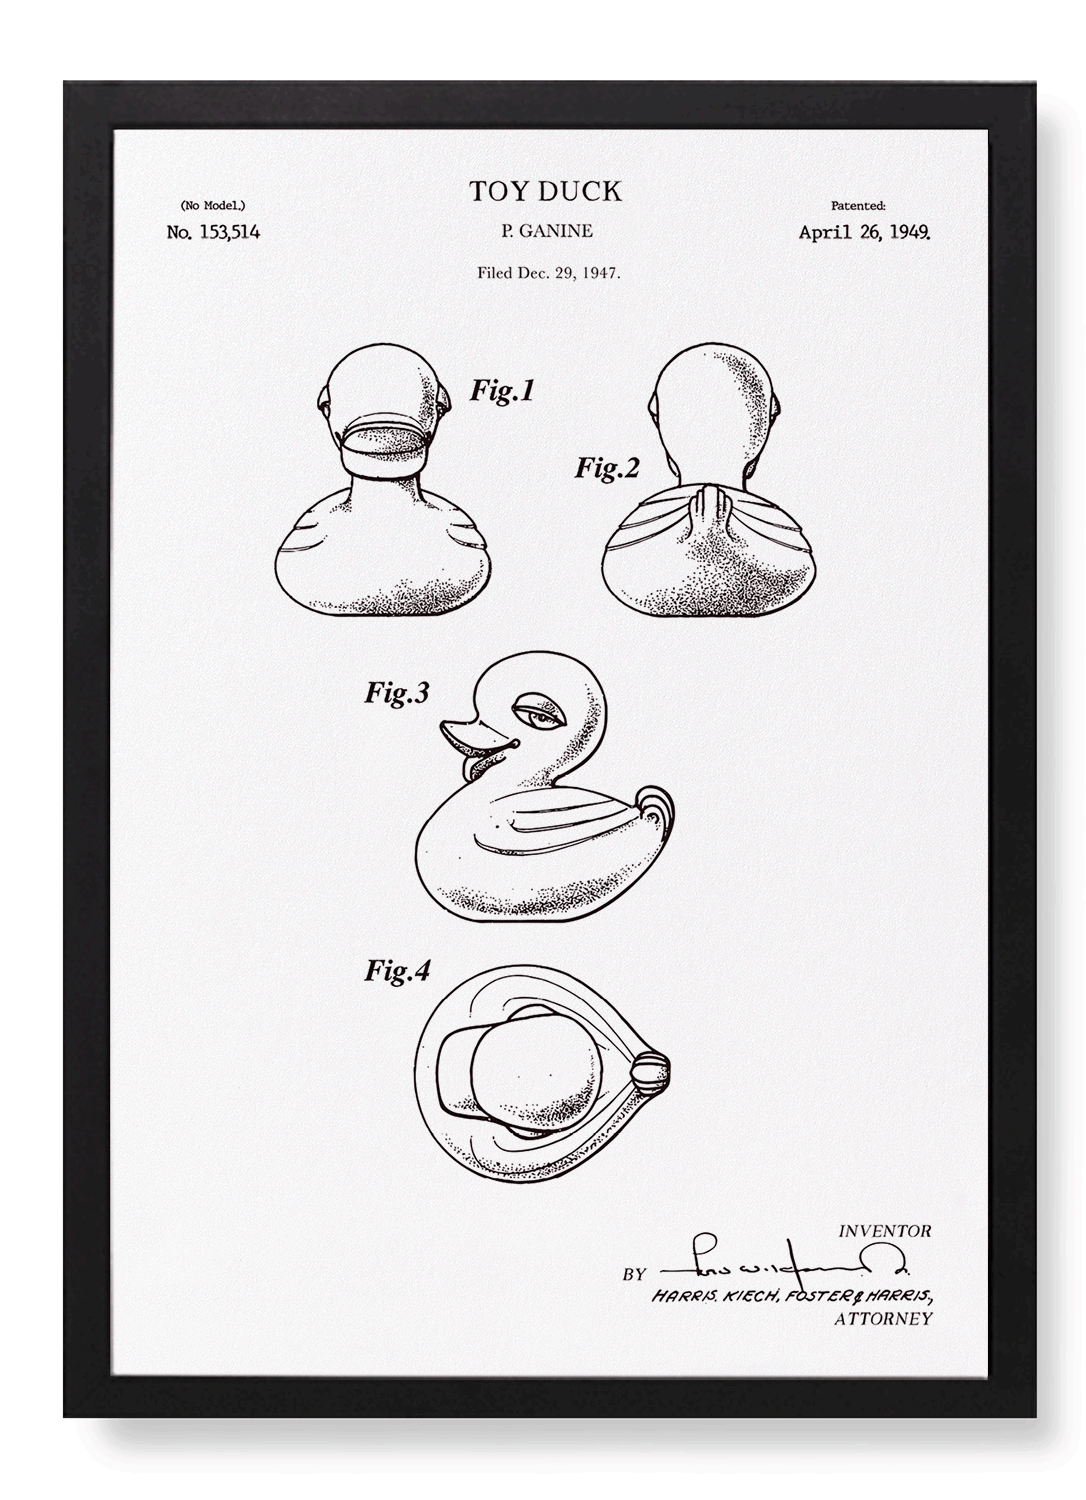 PATENT OF TOY DUCK (1949)